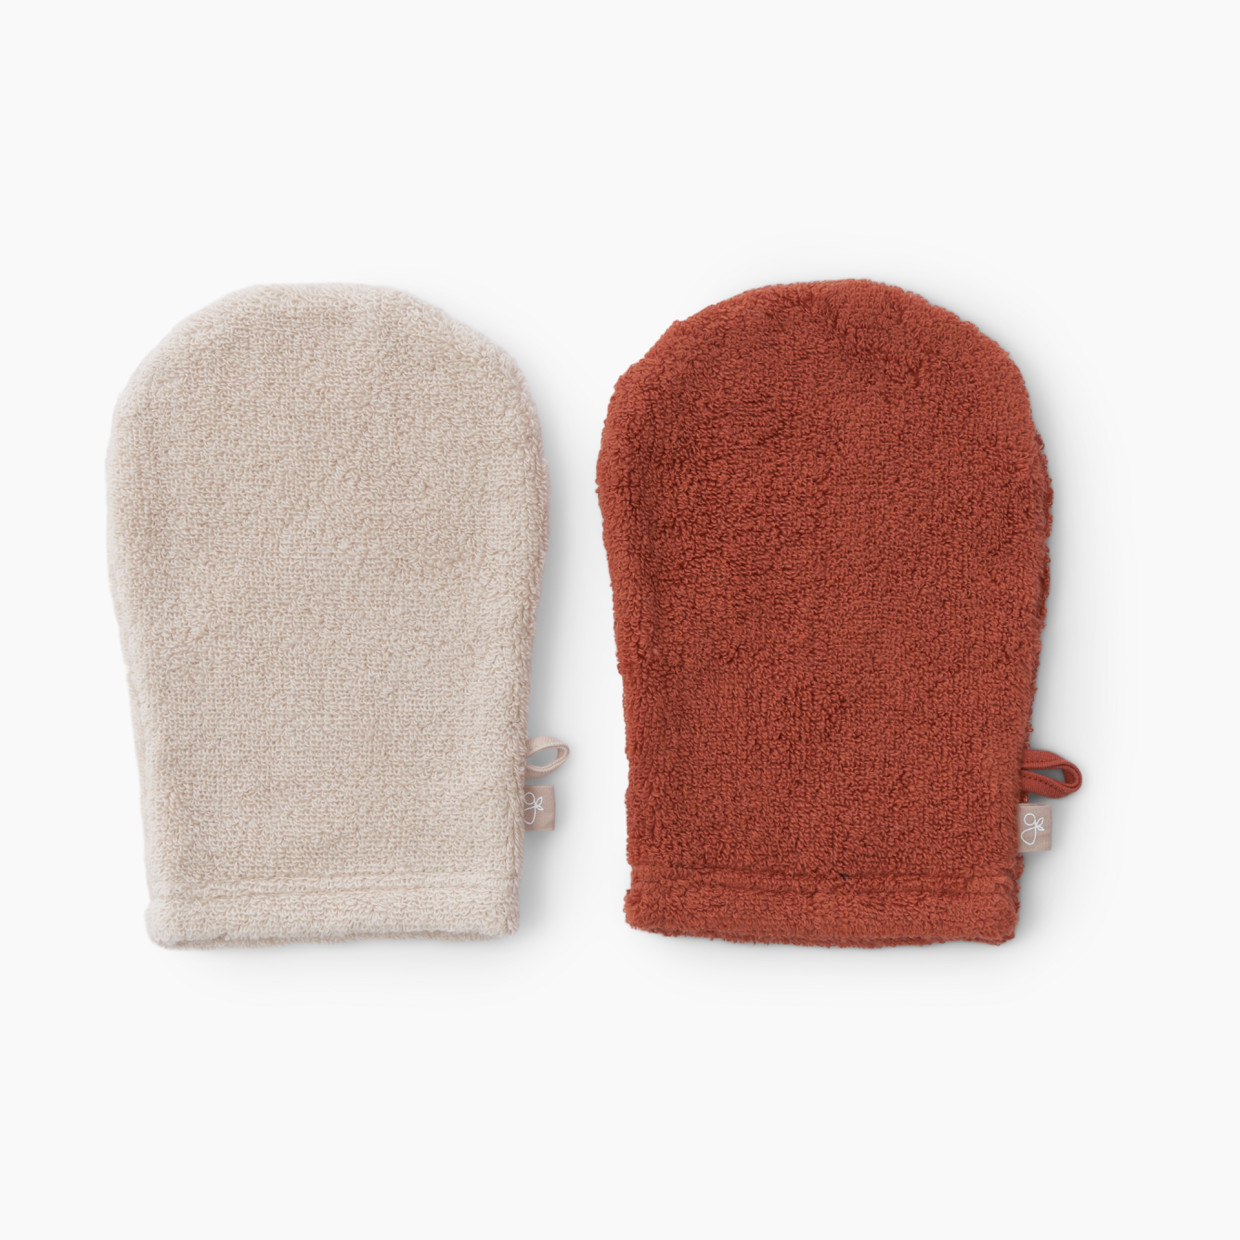 Goumi Kids x Babylist Cotton Terry Washcloth Mitts (2 pack) - Clay + Oat, O/S, 2.